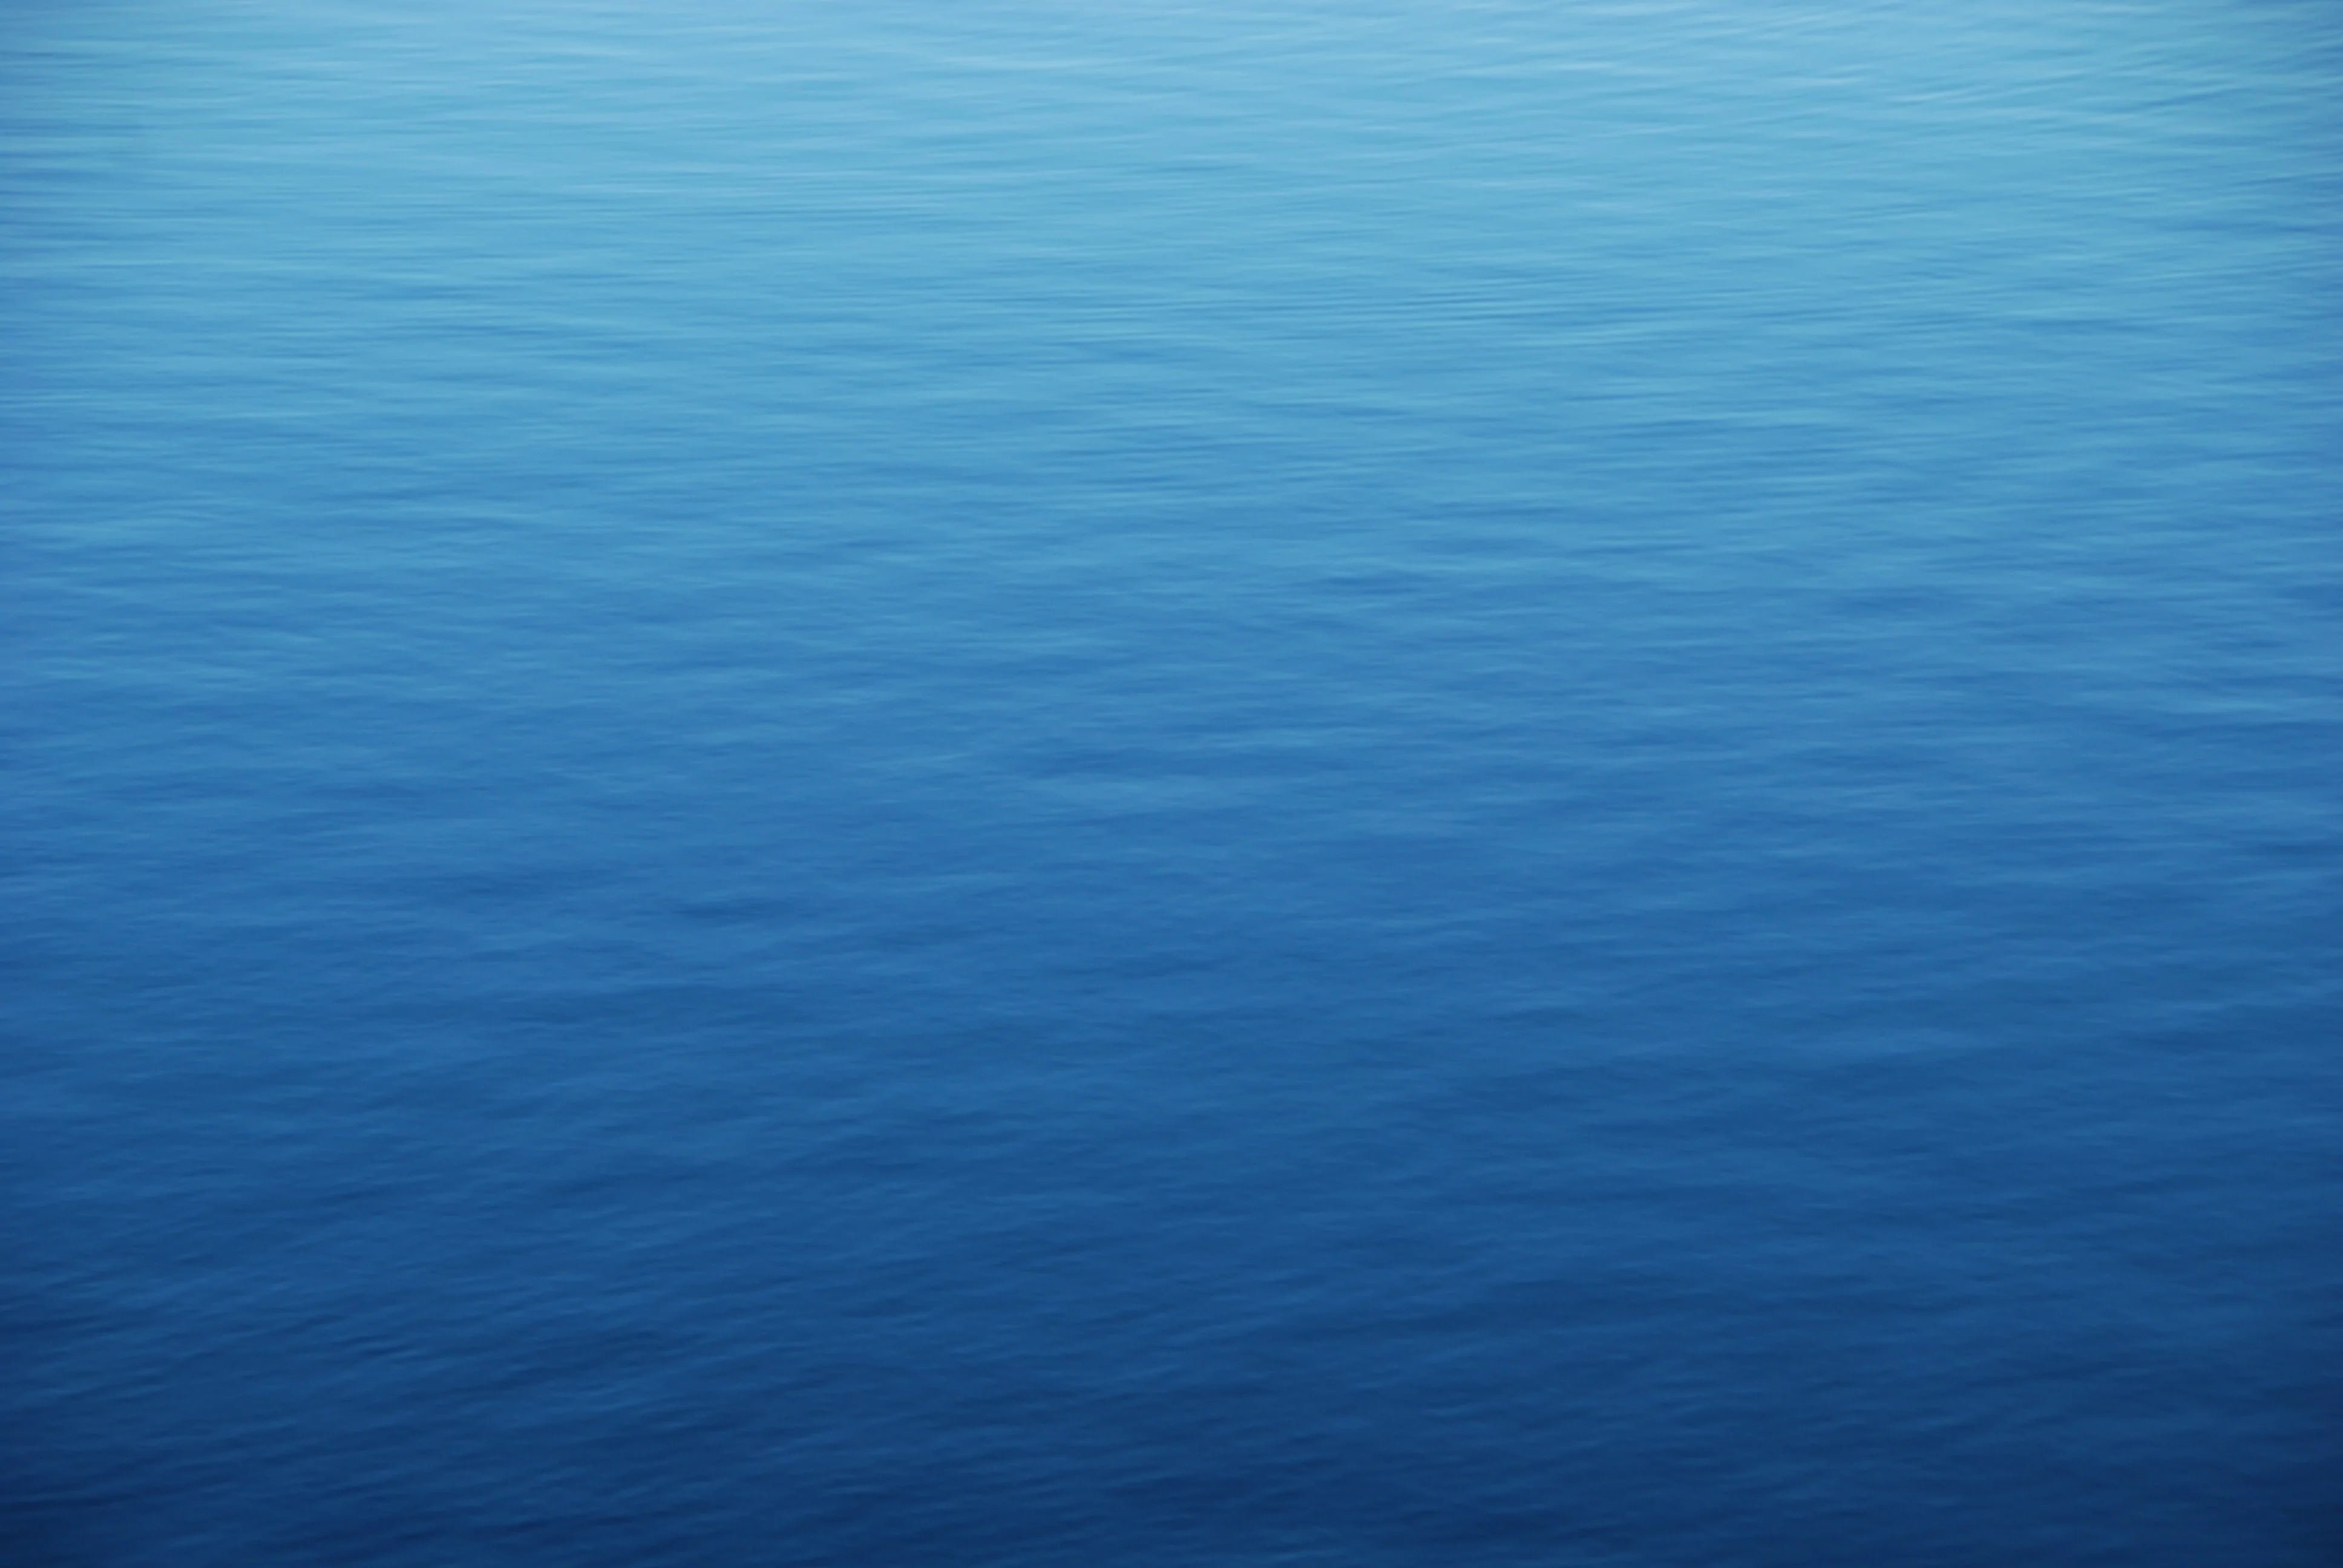 calm blue expanse of ocean water with soft rippling waves